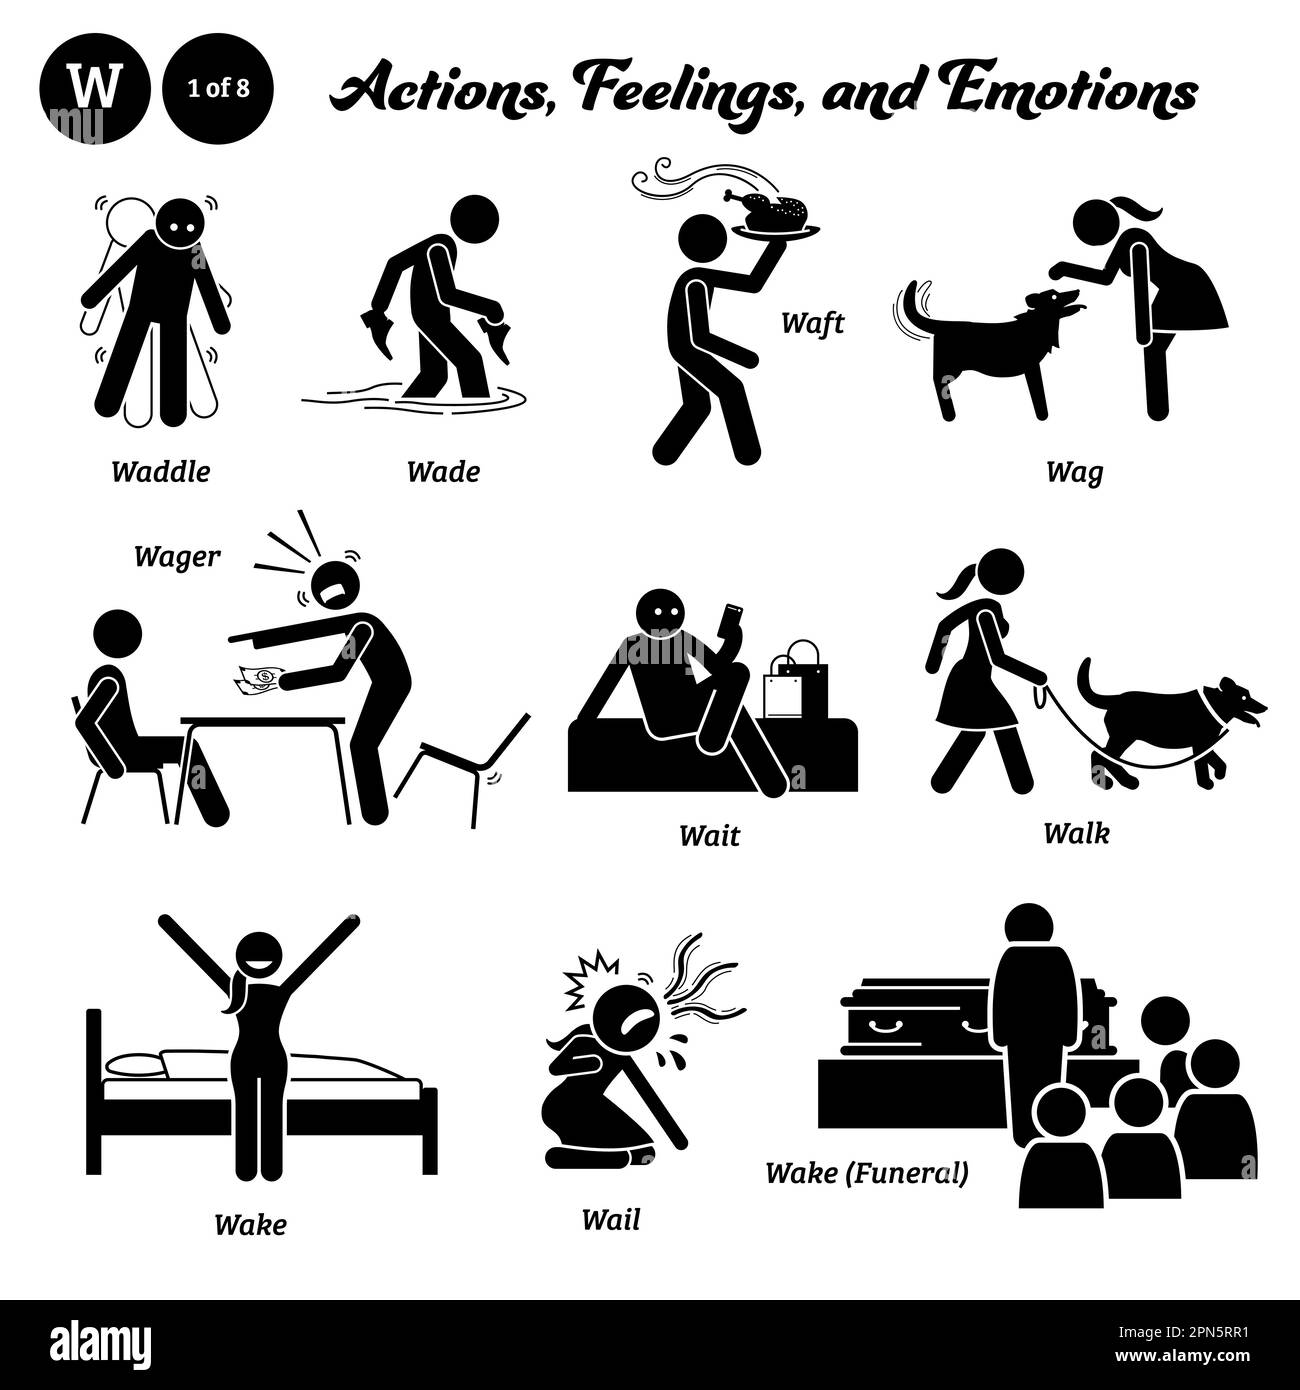 Stick figure human people man action, feelings, and emotions icons alphabet W. Waddle, wade, waft, wag, wager, wait, walk, wake, wail, wake, and funer Stock Vector